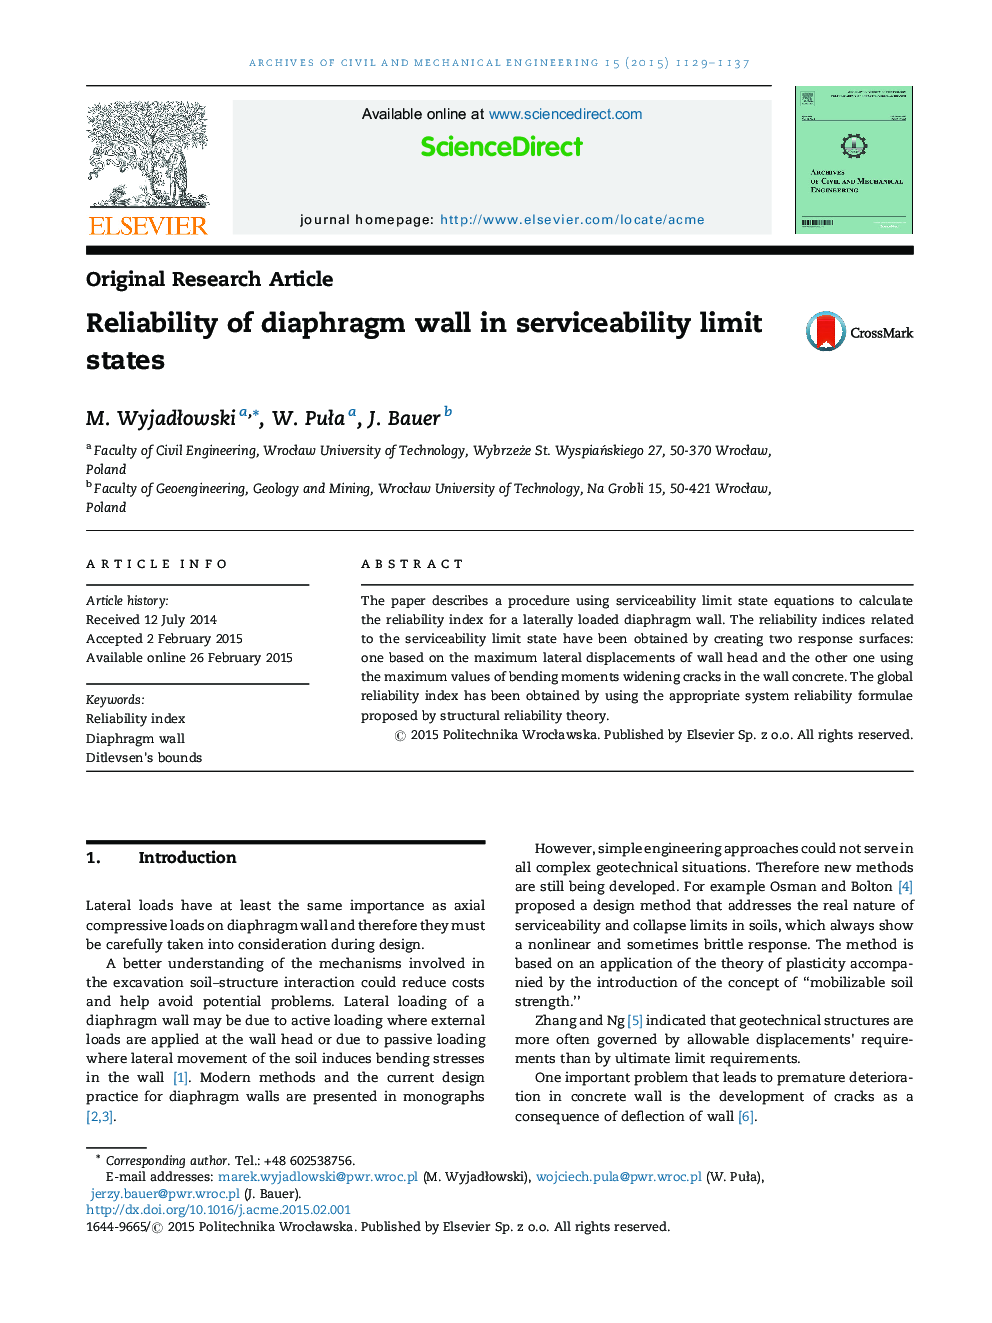 Reliability of diaphragm wall in serviceability limit states